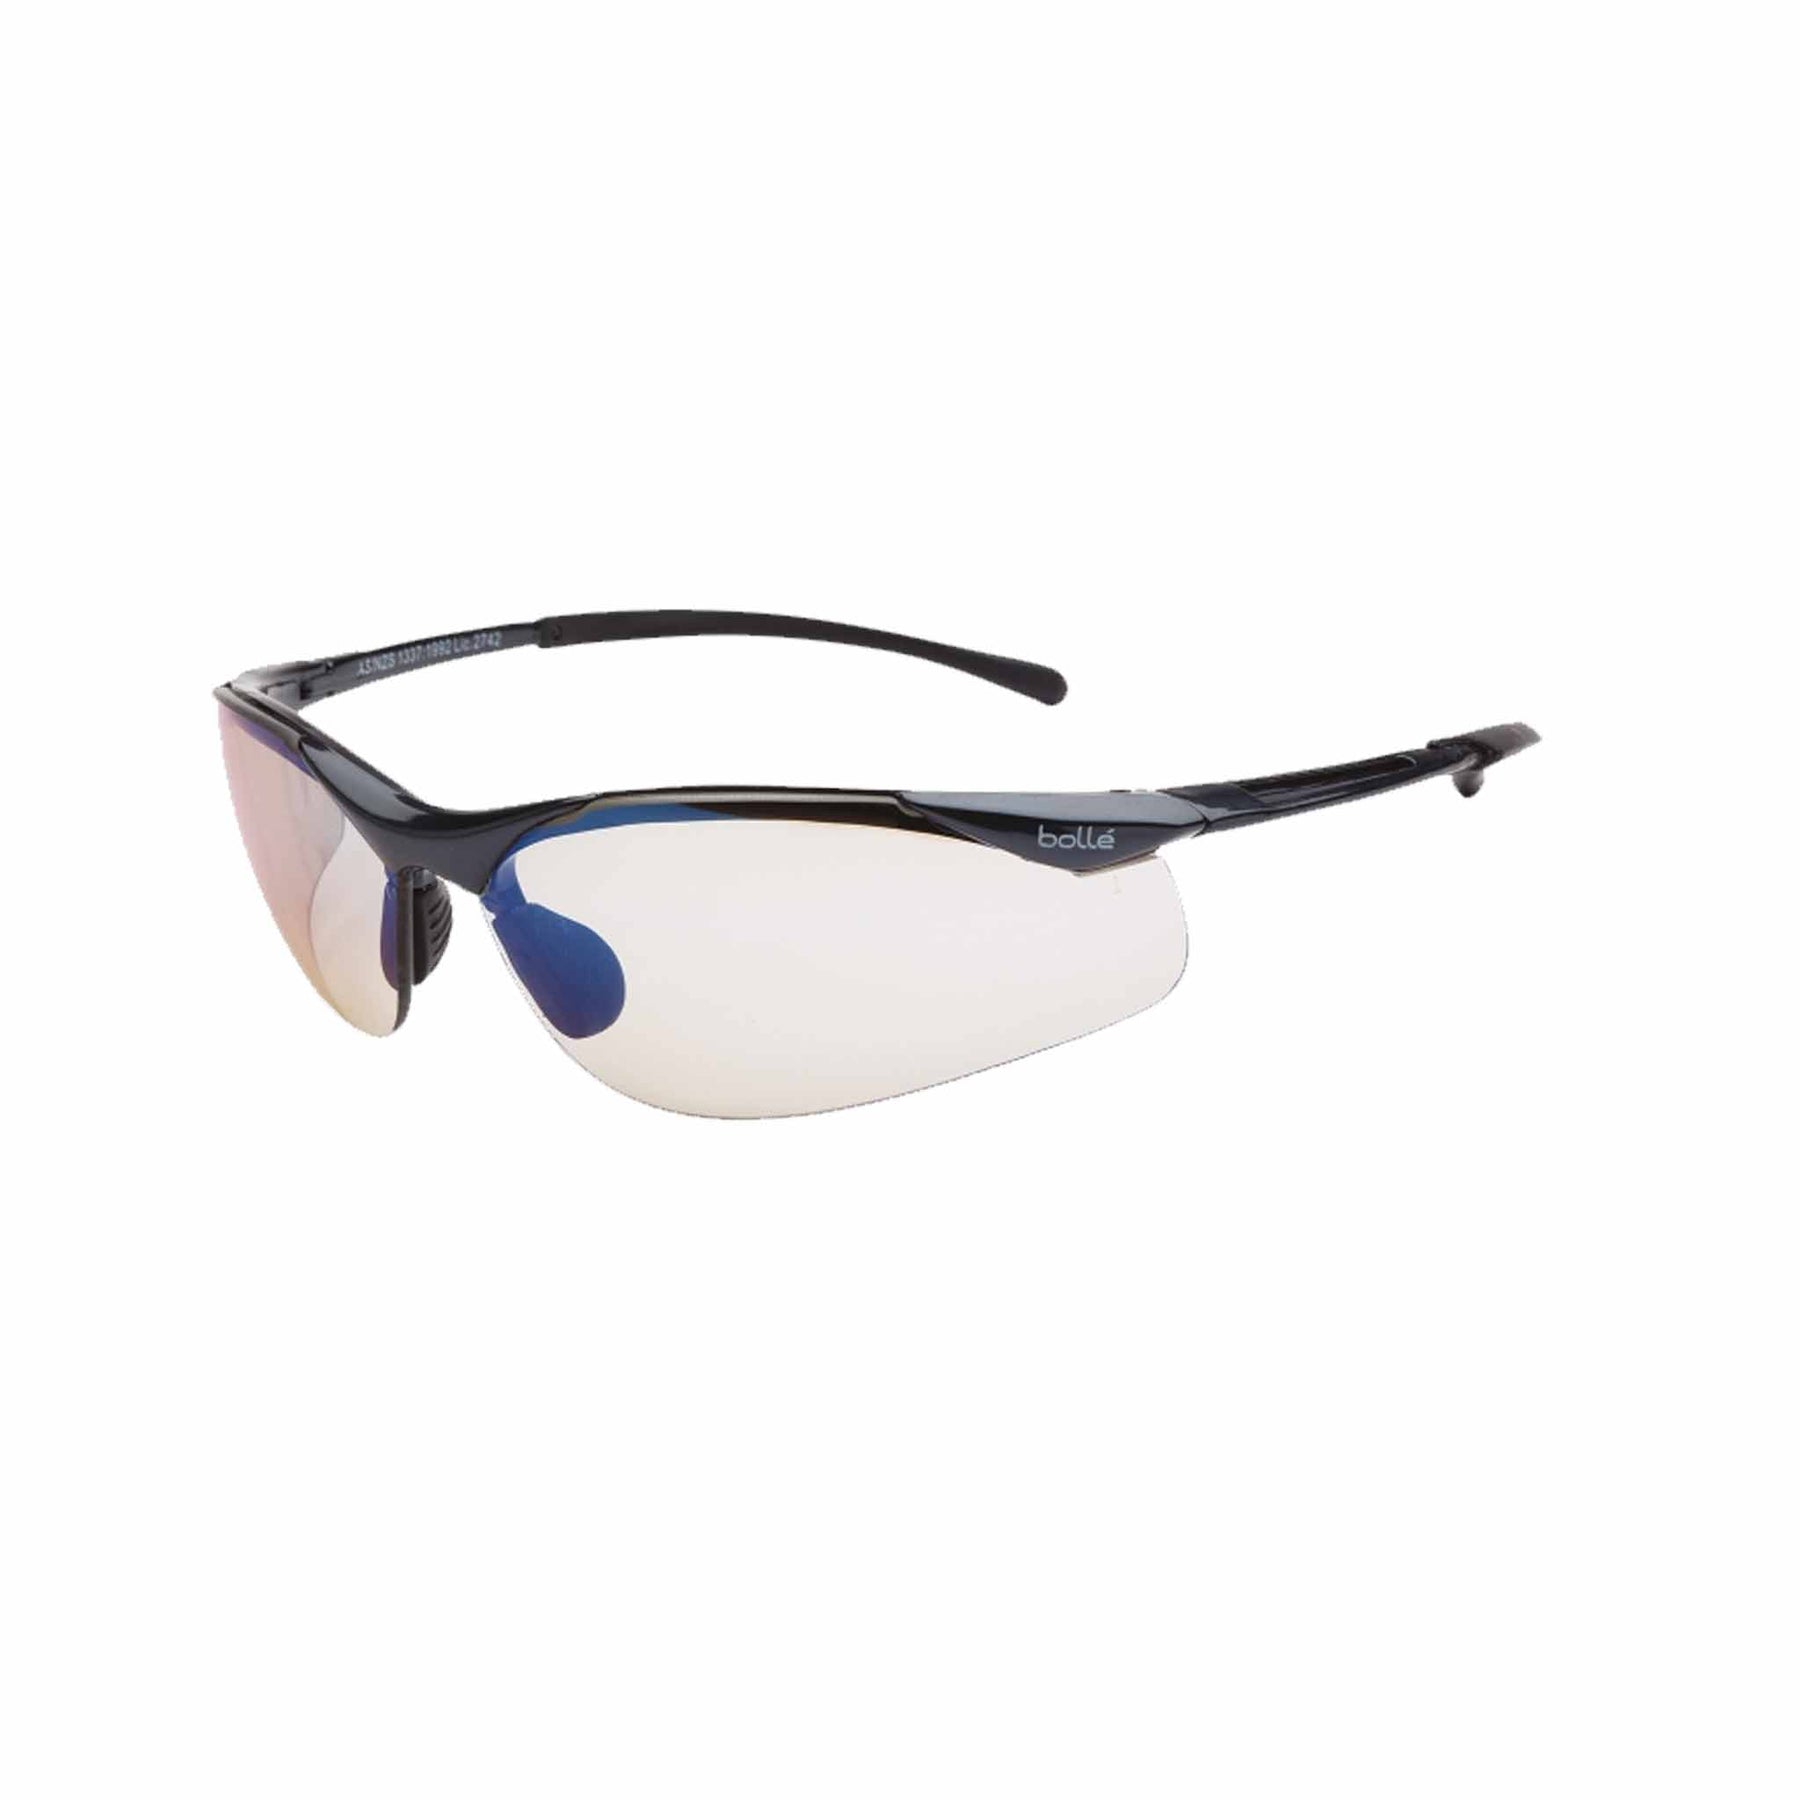 bolle contour (sidewinder) glasses with ESP lens